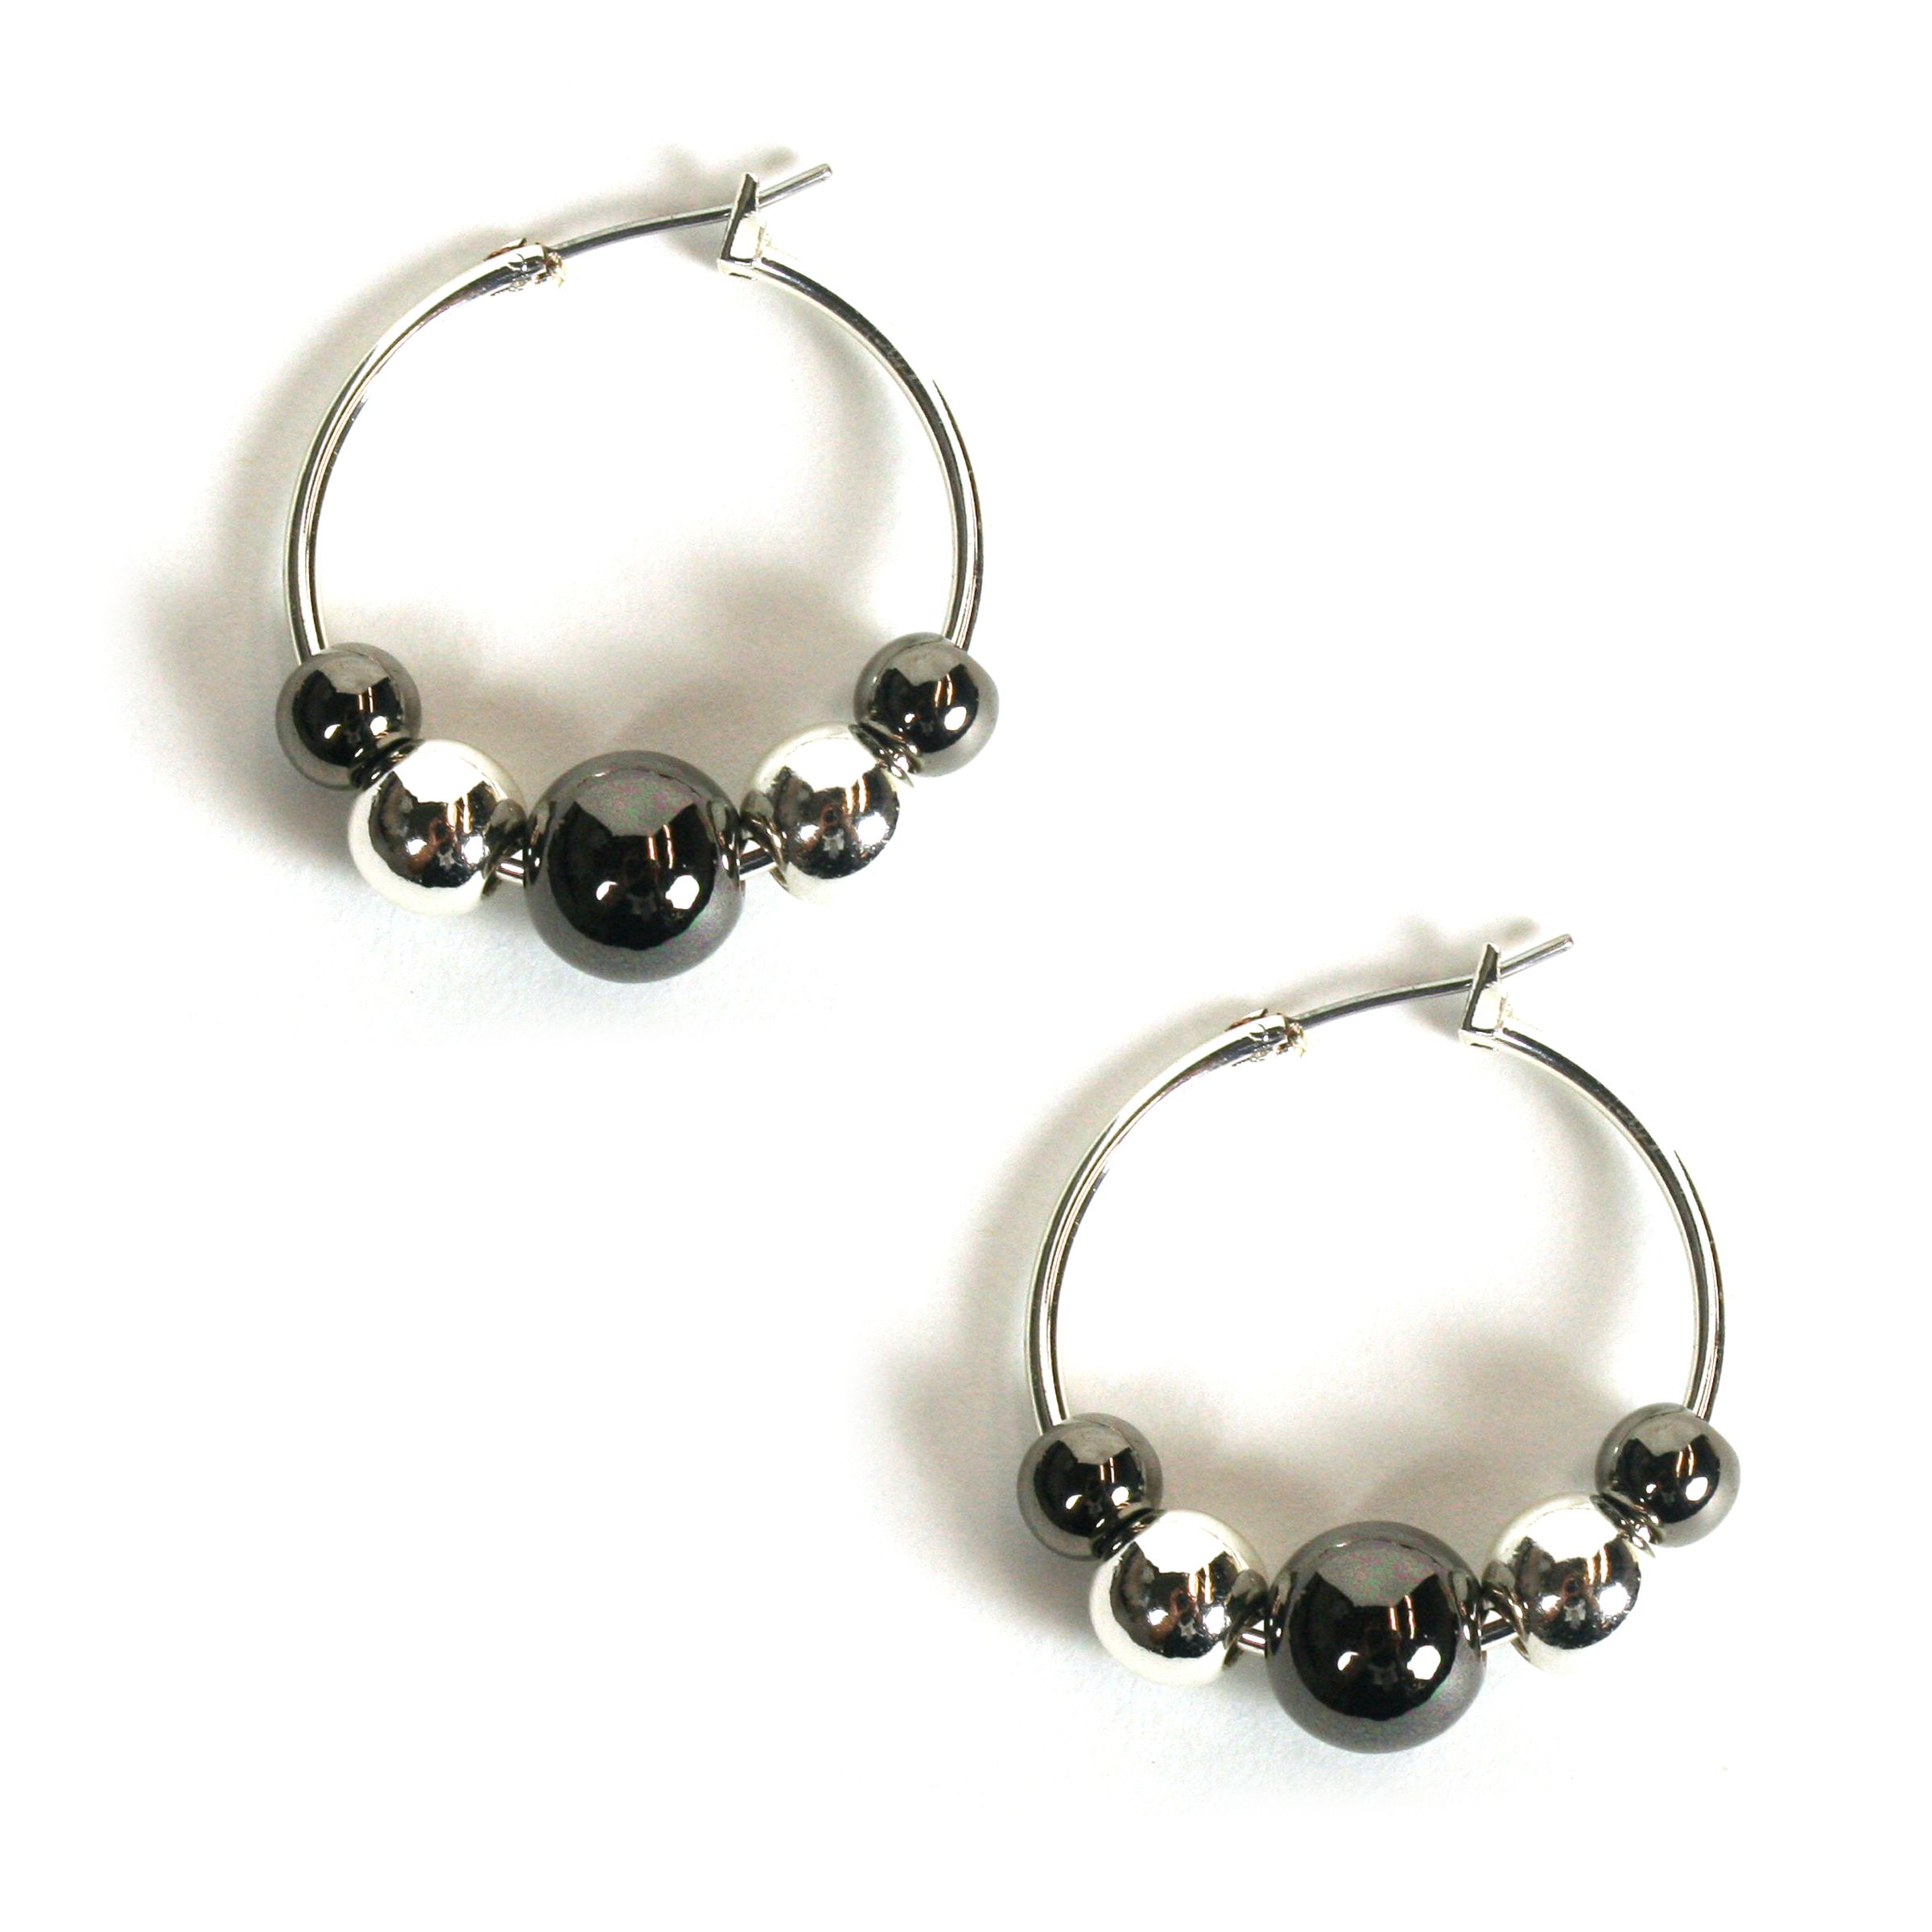 Attention Round wire earrings with 5 beads